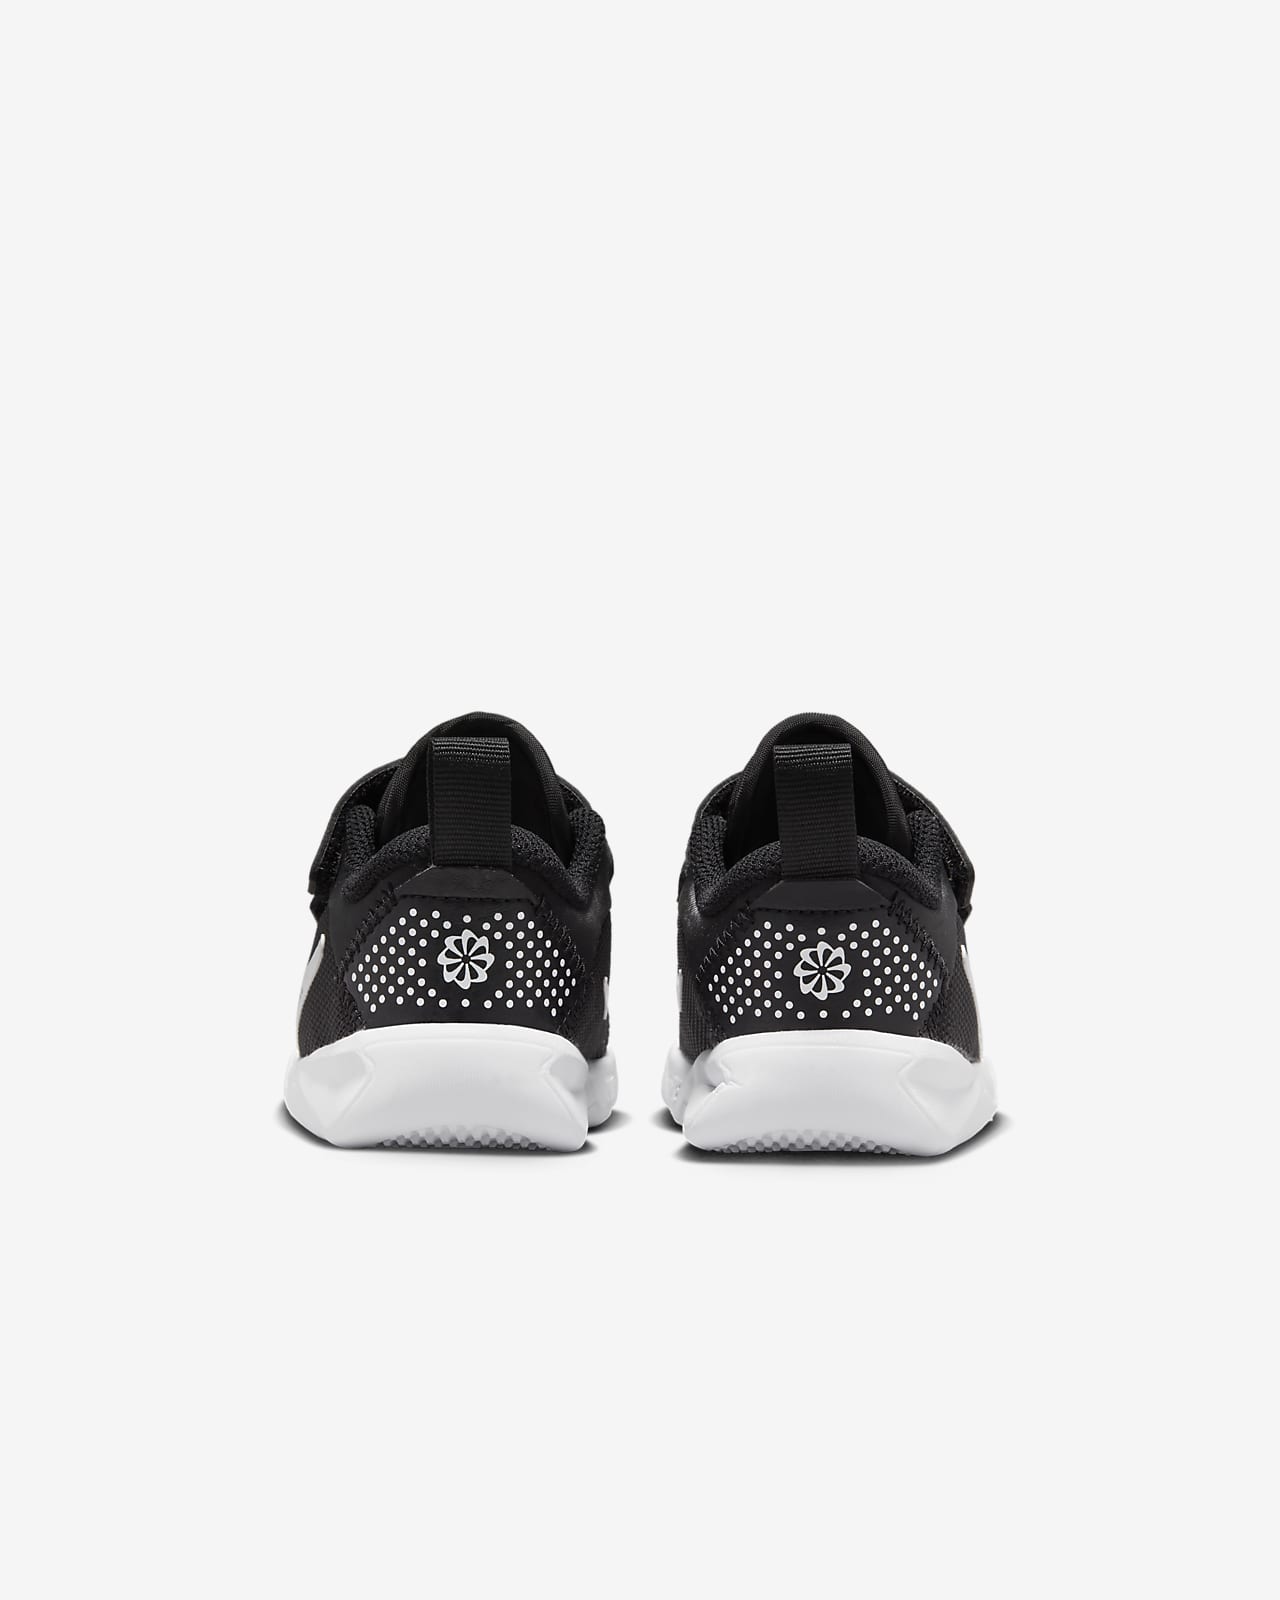 Nike Omni Multi-Court Baby/Toddler Shoes. CH Nike